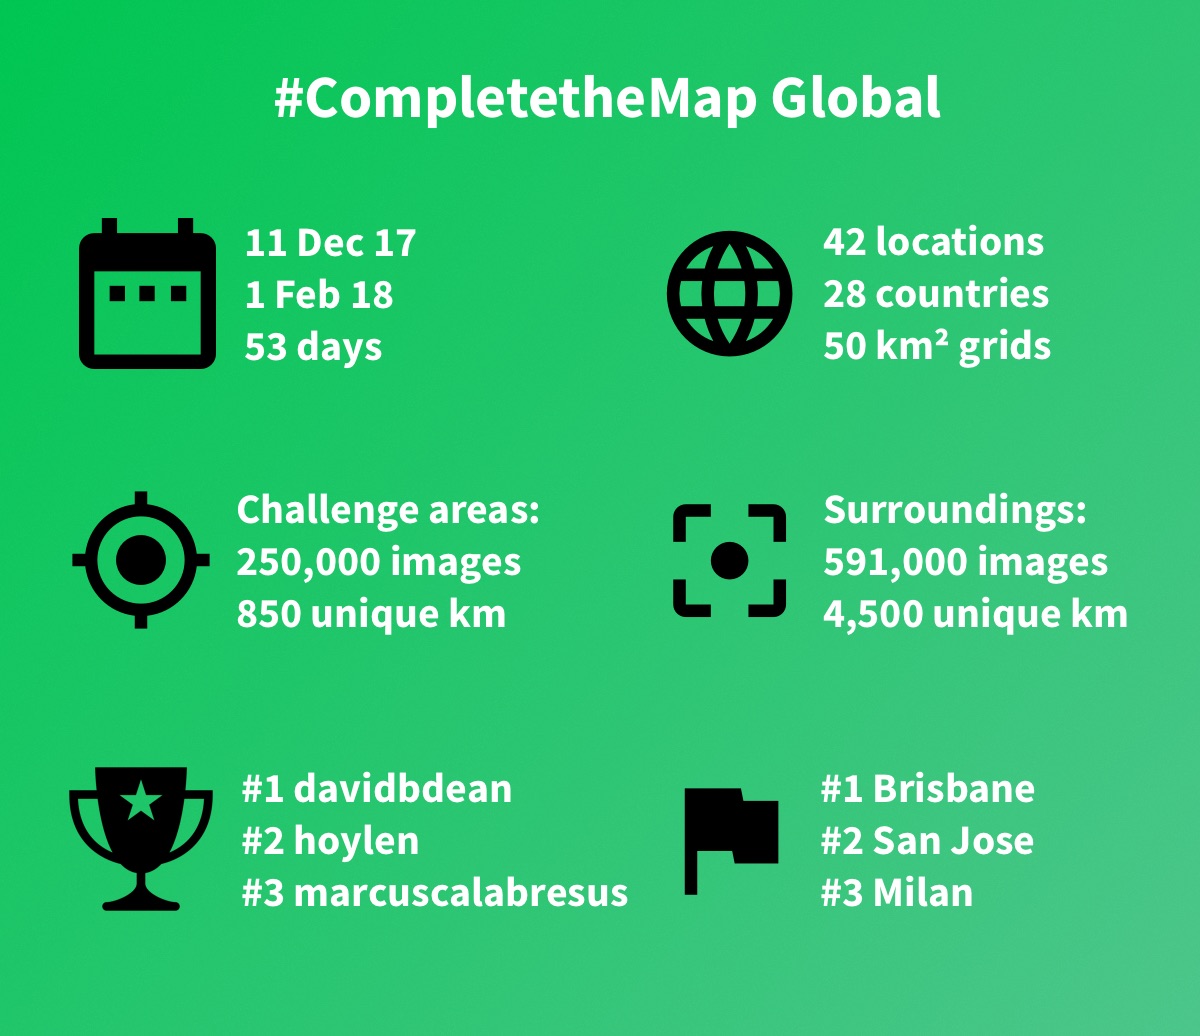 Global #CompletetheMap results